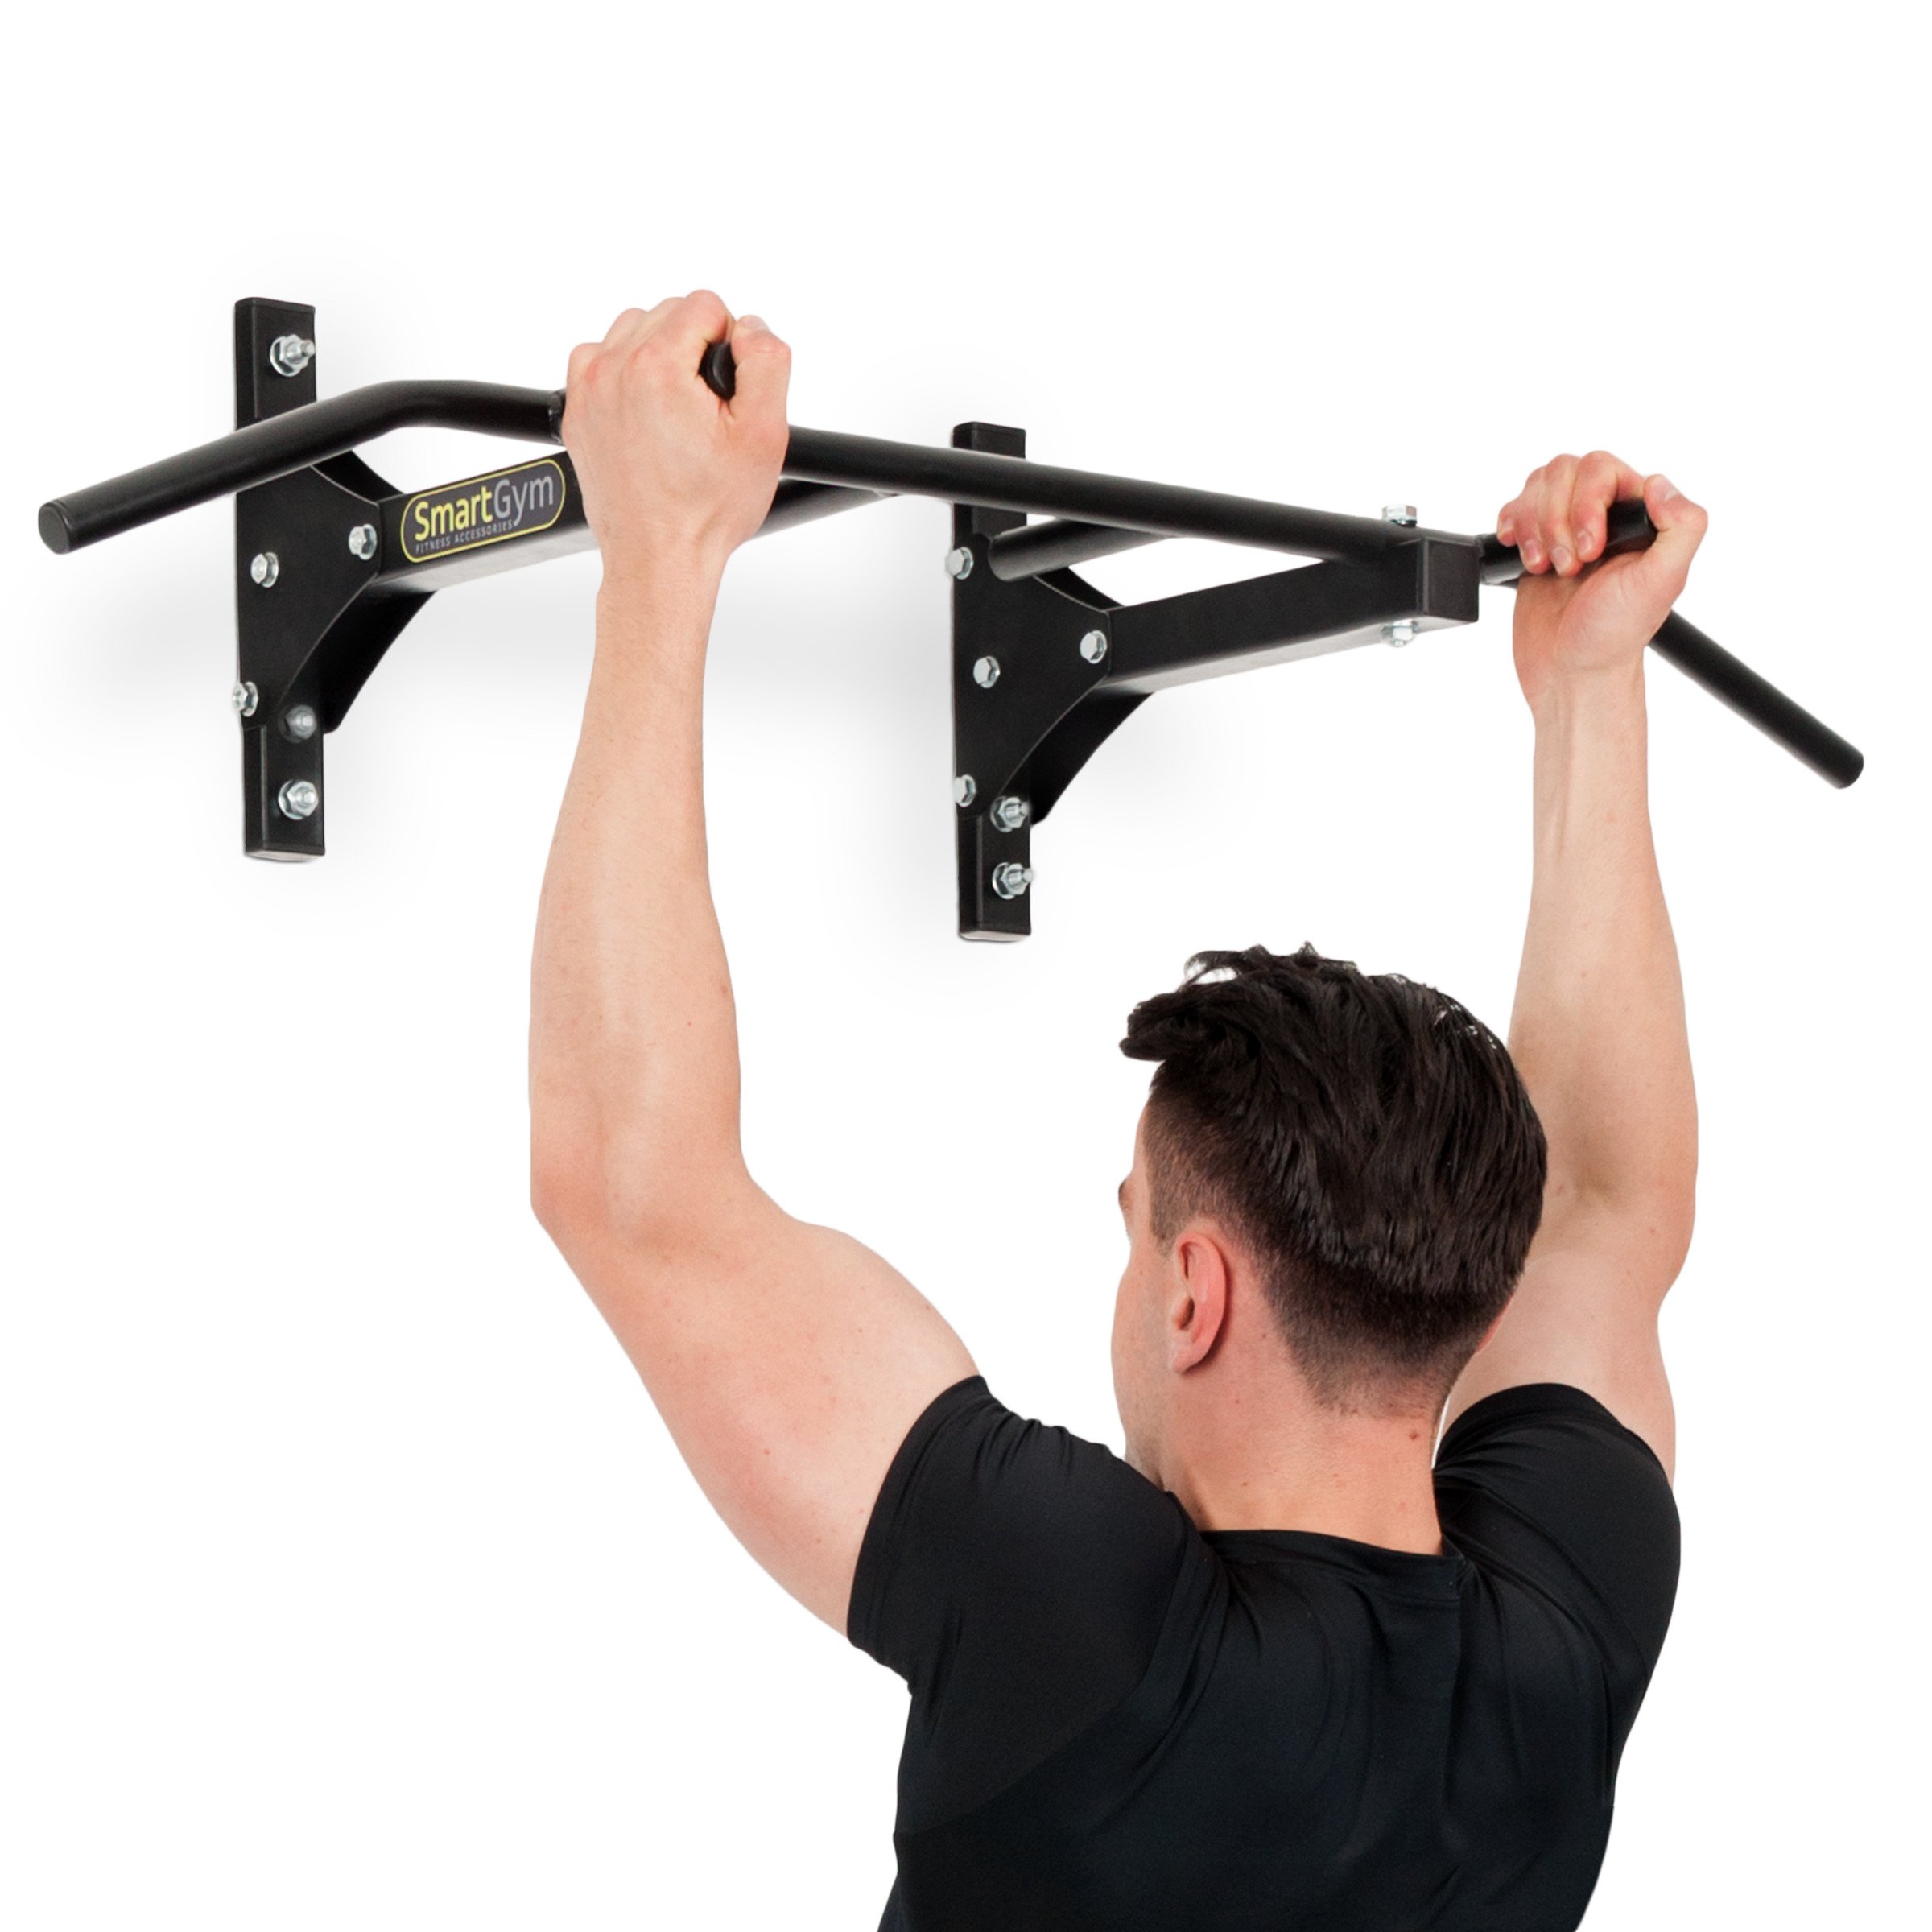 Wall-ceiling pull up bar SG-12 - SmartGym Fitness Accessories